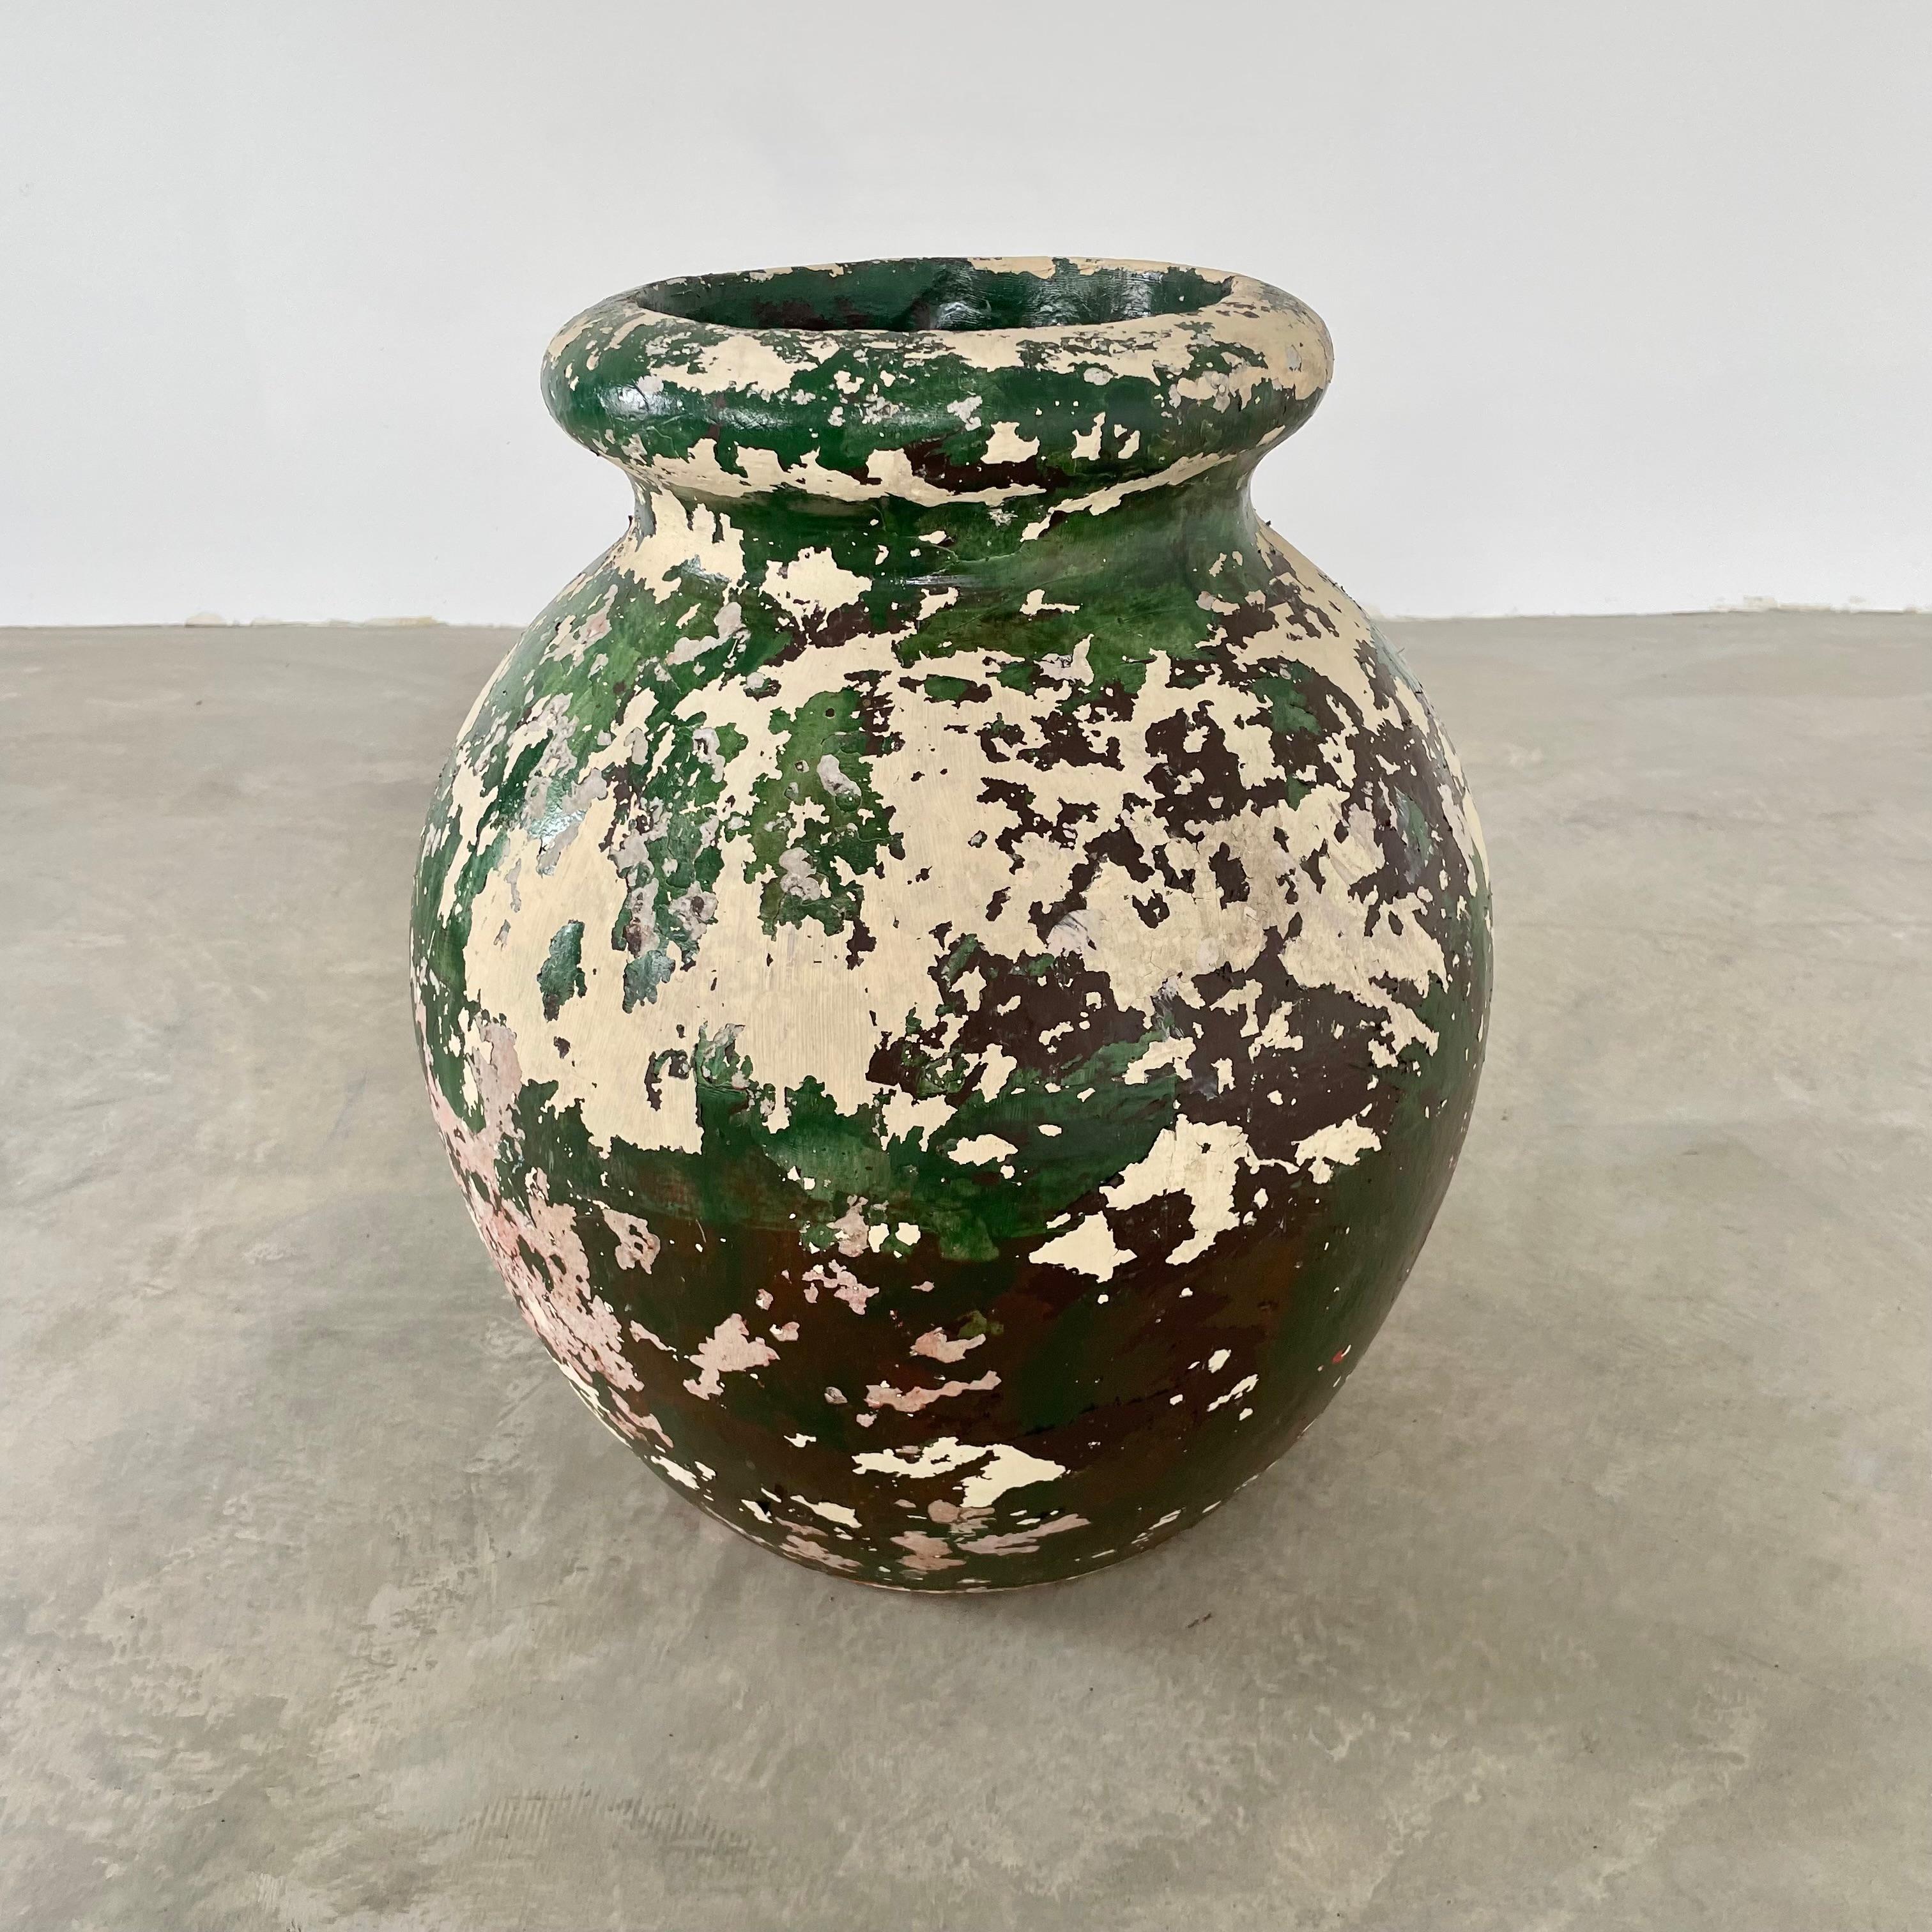 Stunning concrete olive jar planter by Willy Guhl with great patina and coloring. Amazing depth to the piece due to the layers of yellow, green and brownish red hues. Simple and elegant design perfect for any garden or patio. Small drainage hole on